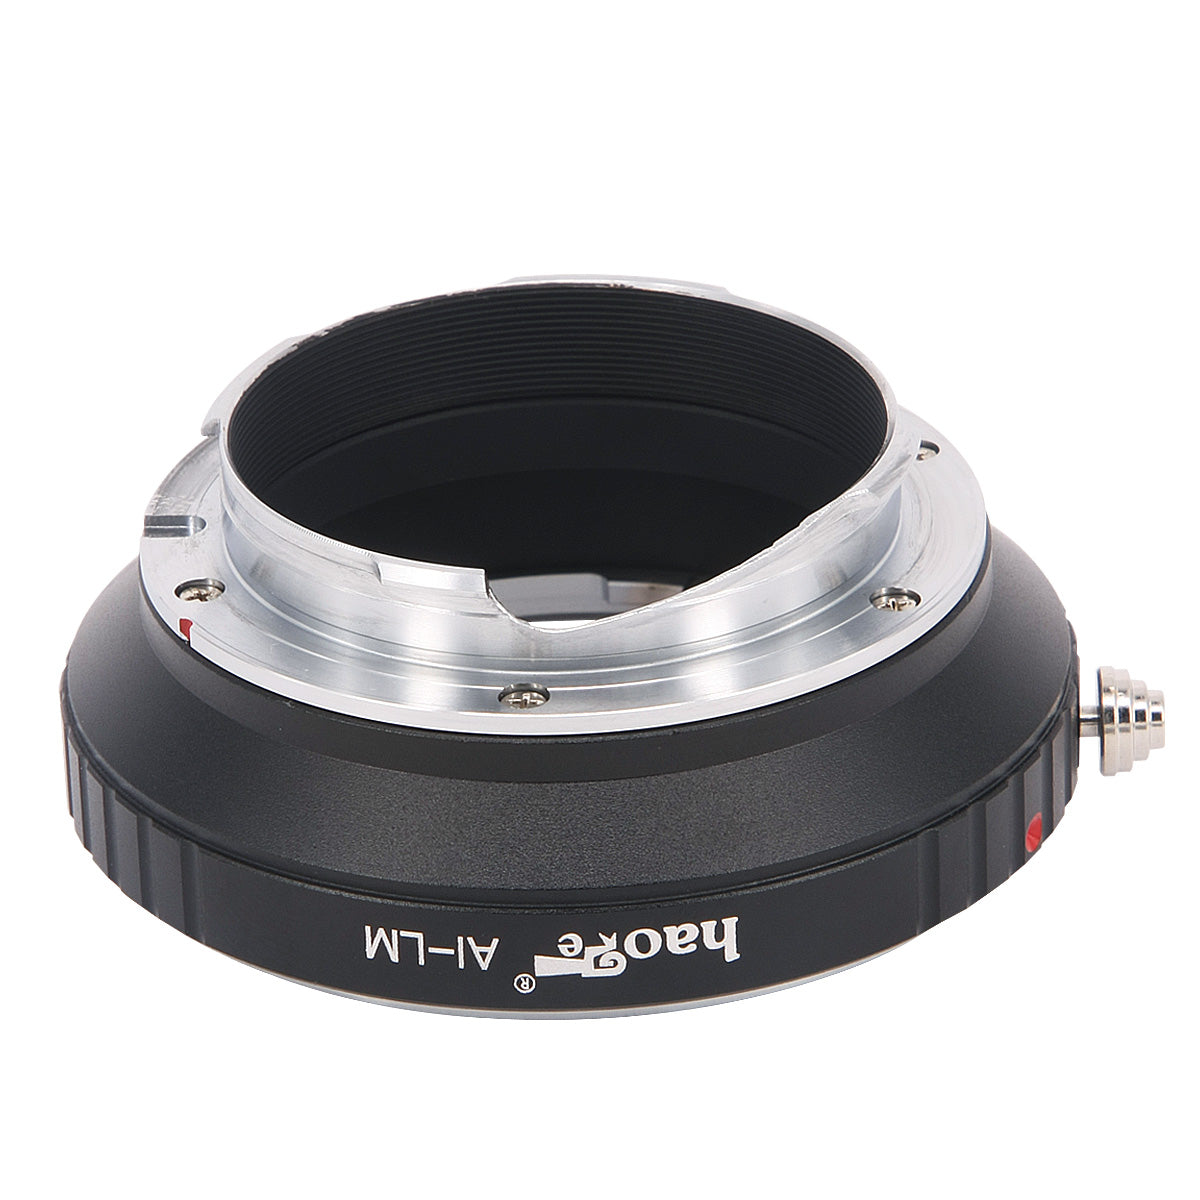 Haoge Lens Mount Adapter for Nikon Nikkor AI / AIS / D Lens to Leica M-mount Camera such as M240, M240P, M262, M3, M2, M1, M4, M5, CL, M6, MP, M7, M8, M9, M9-P, M Monochrom, M-E, M, M-P, M10, M-A